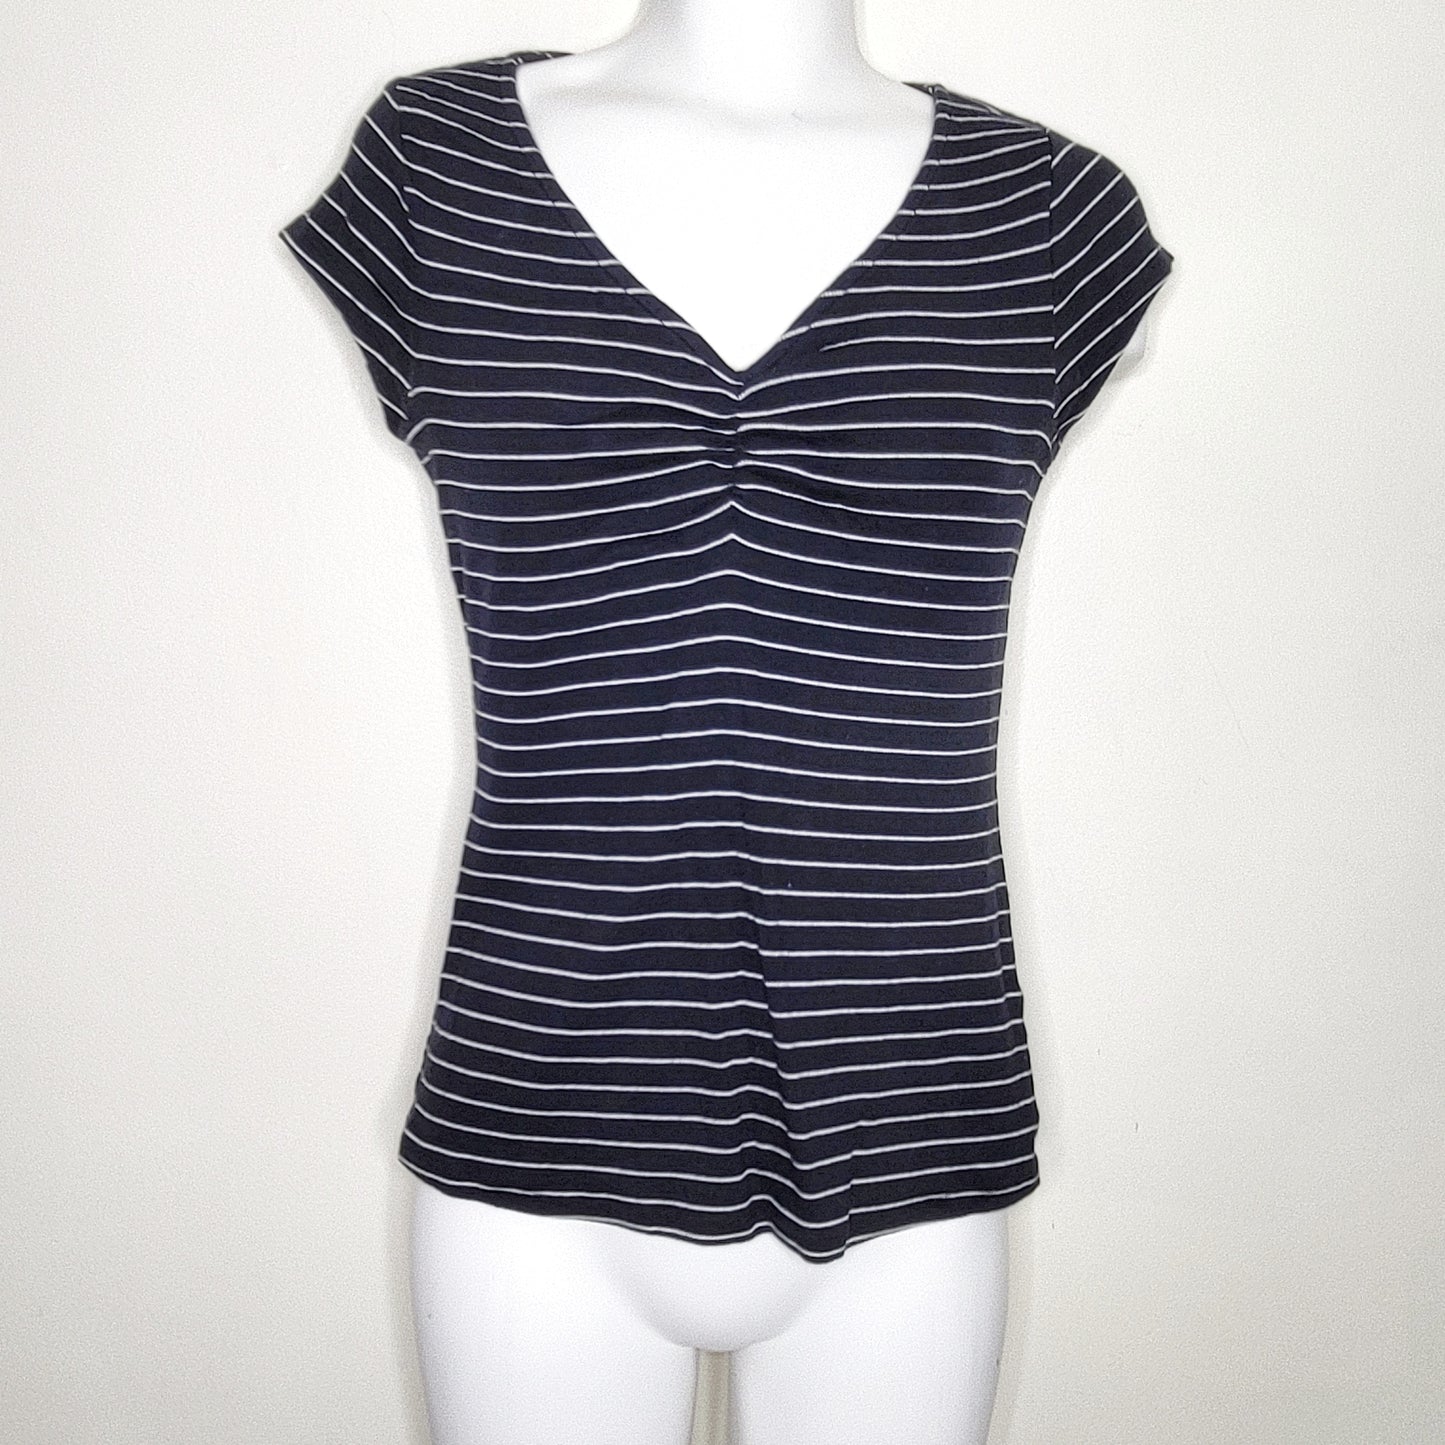 EMIN11 - RW and Co navy striped ribbed v-neck t-shirt, size small, good condition